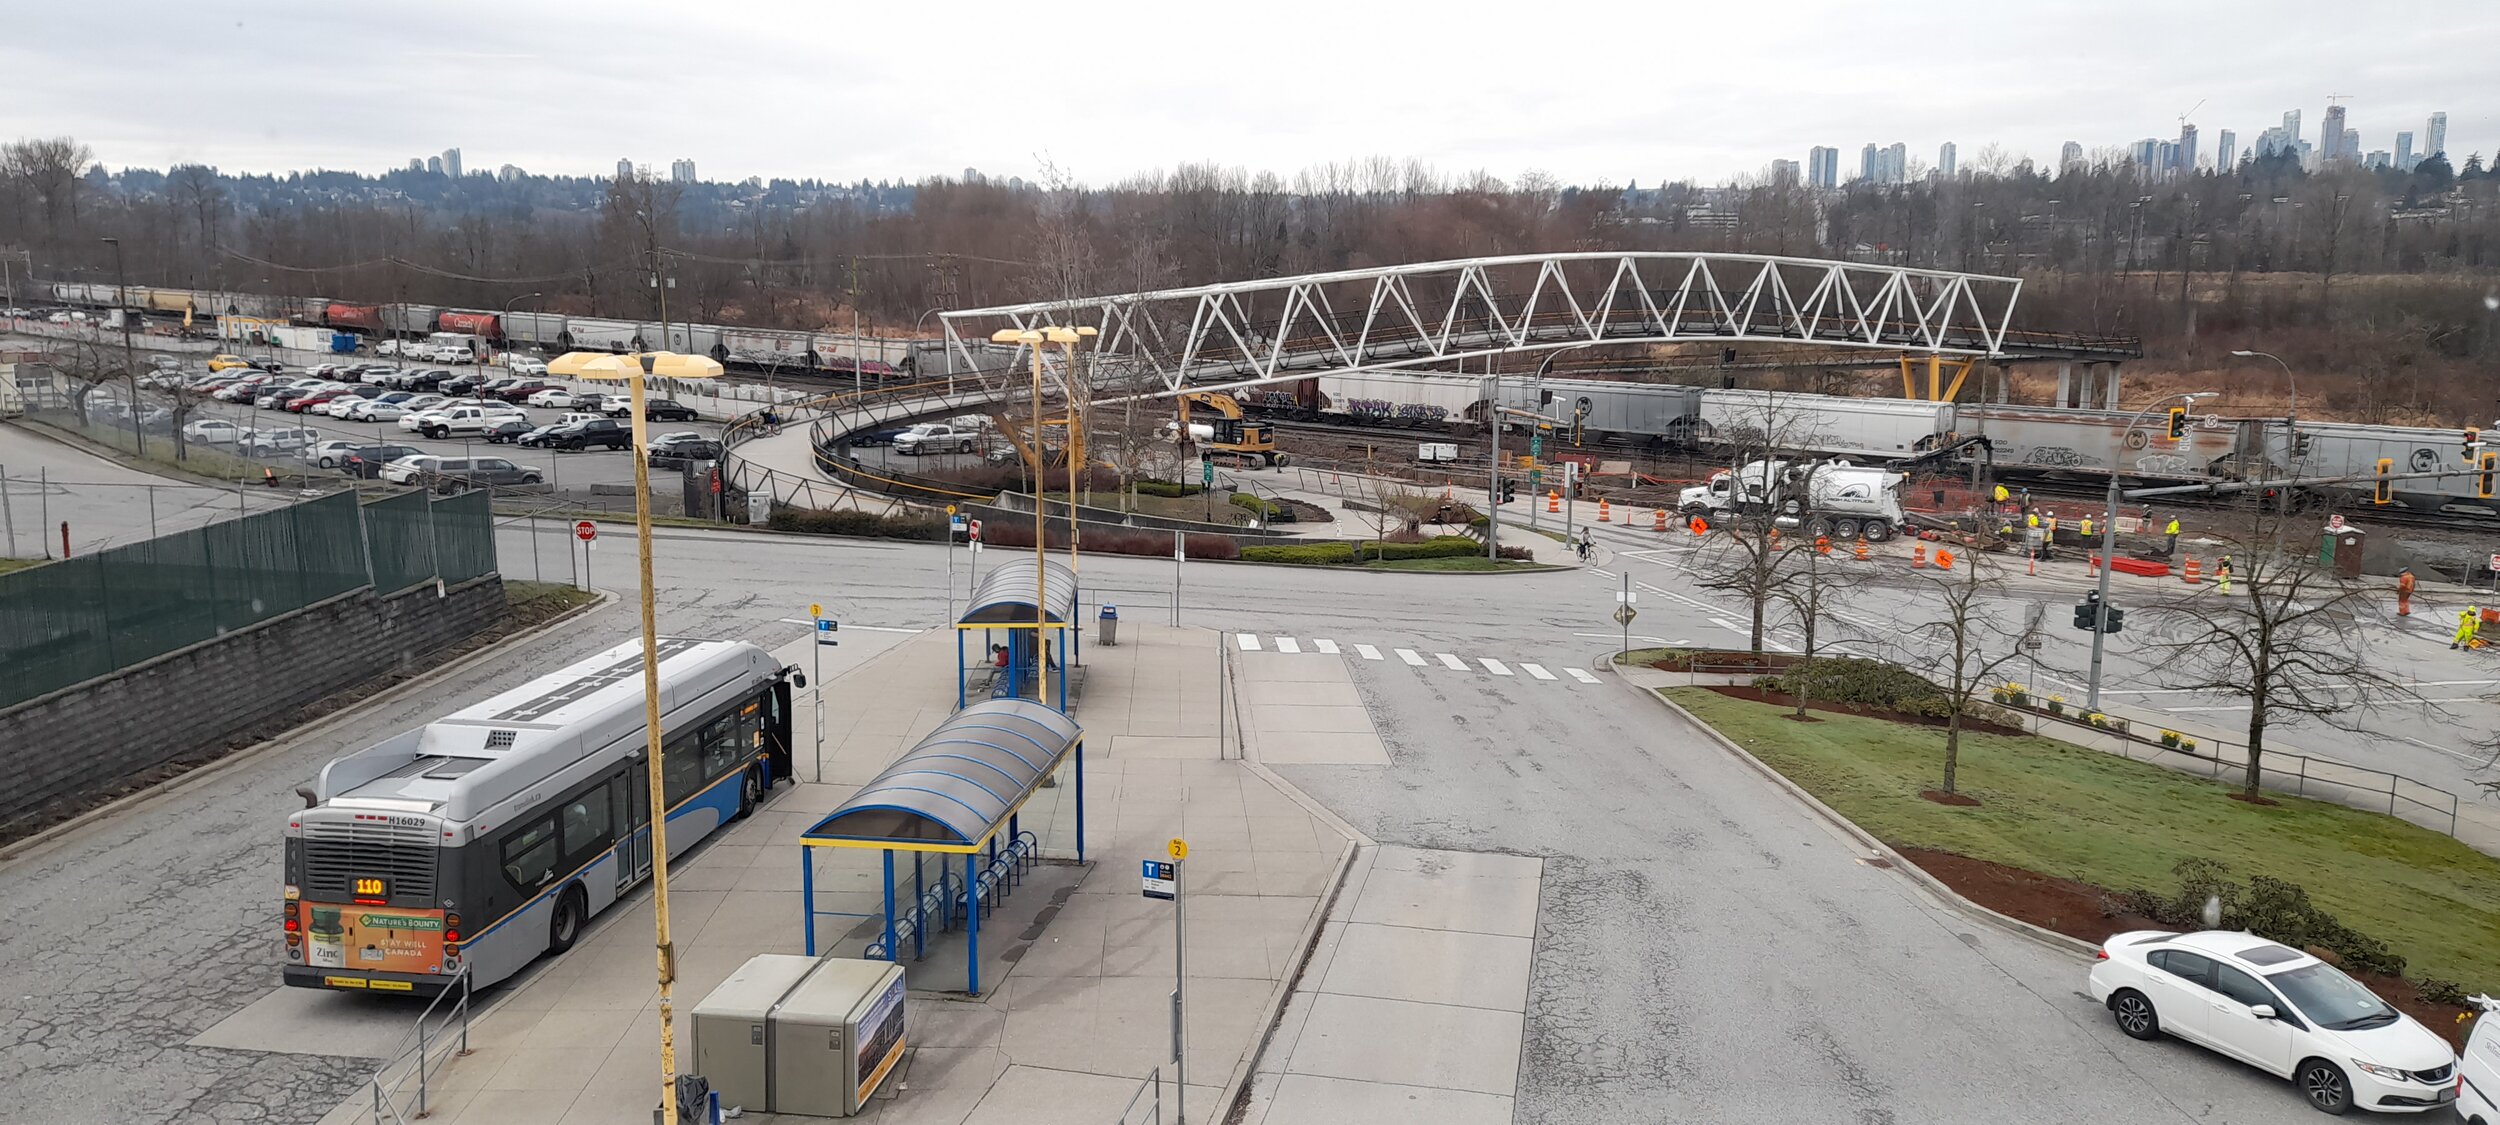 View of the Overpass and Bus Loop from the Skytrain Station